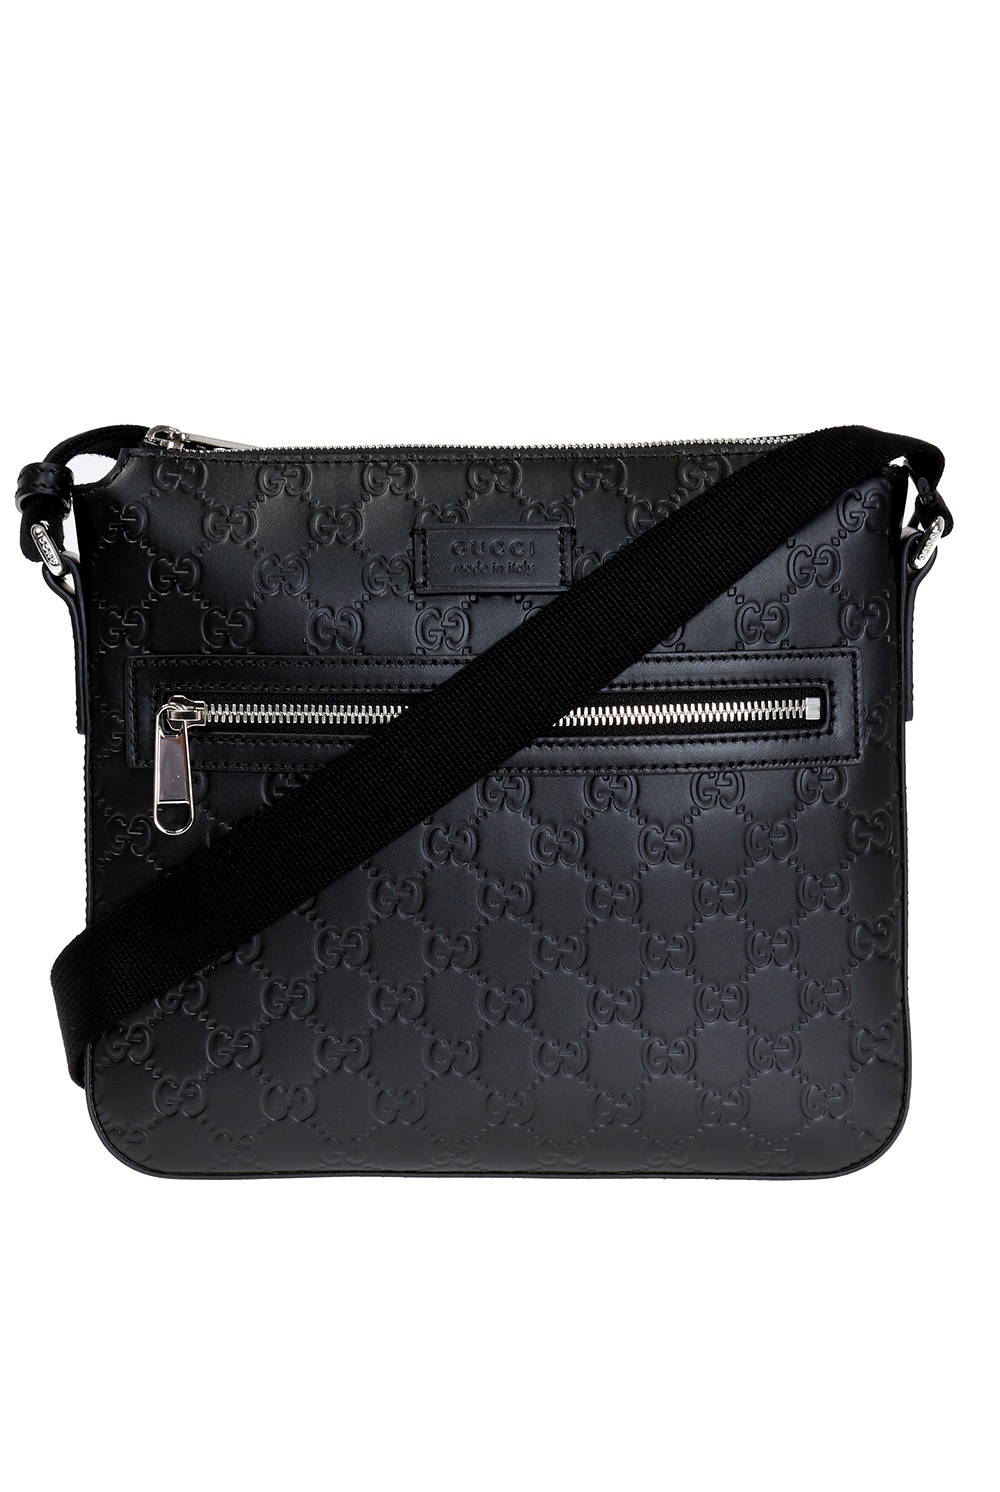 Gucci Signature Messenger Black in Leather with Silver-tone - US